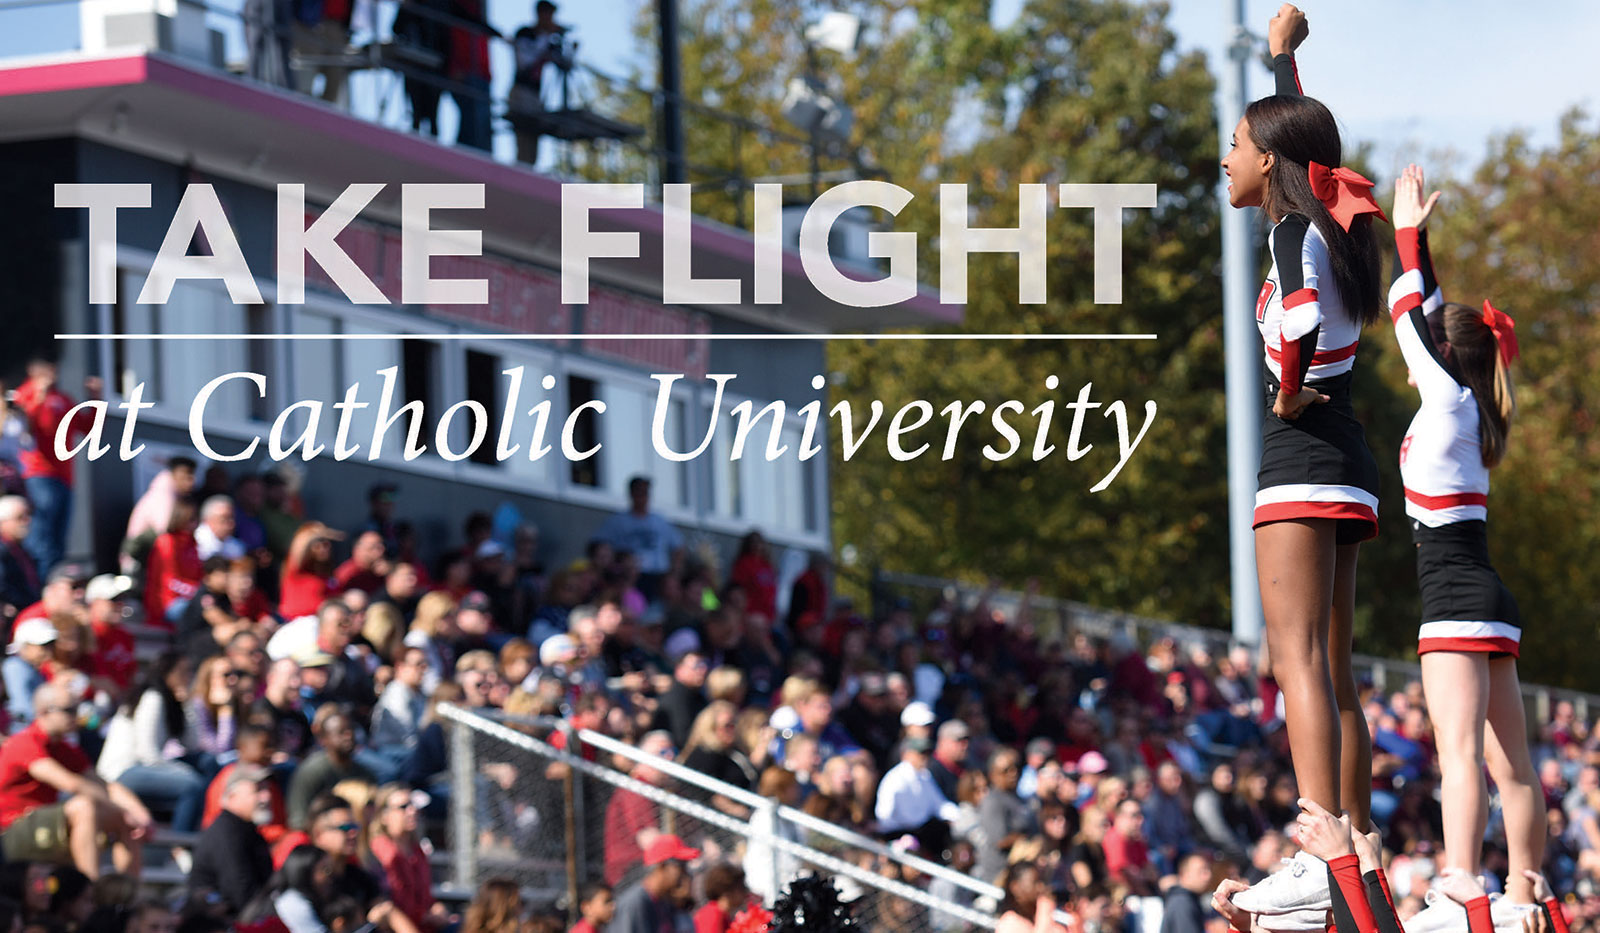 Cheerleaders leading crowd in cheer. Text on image reads Take Flight at Catholic University